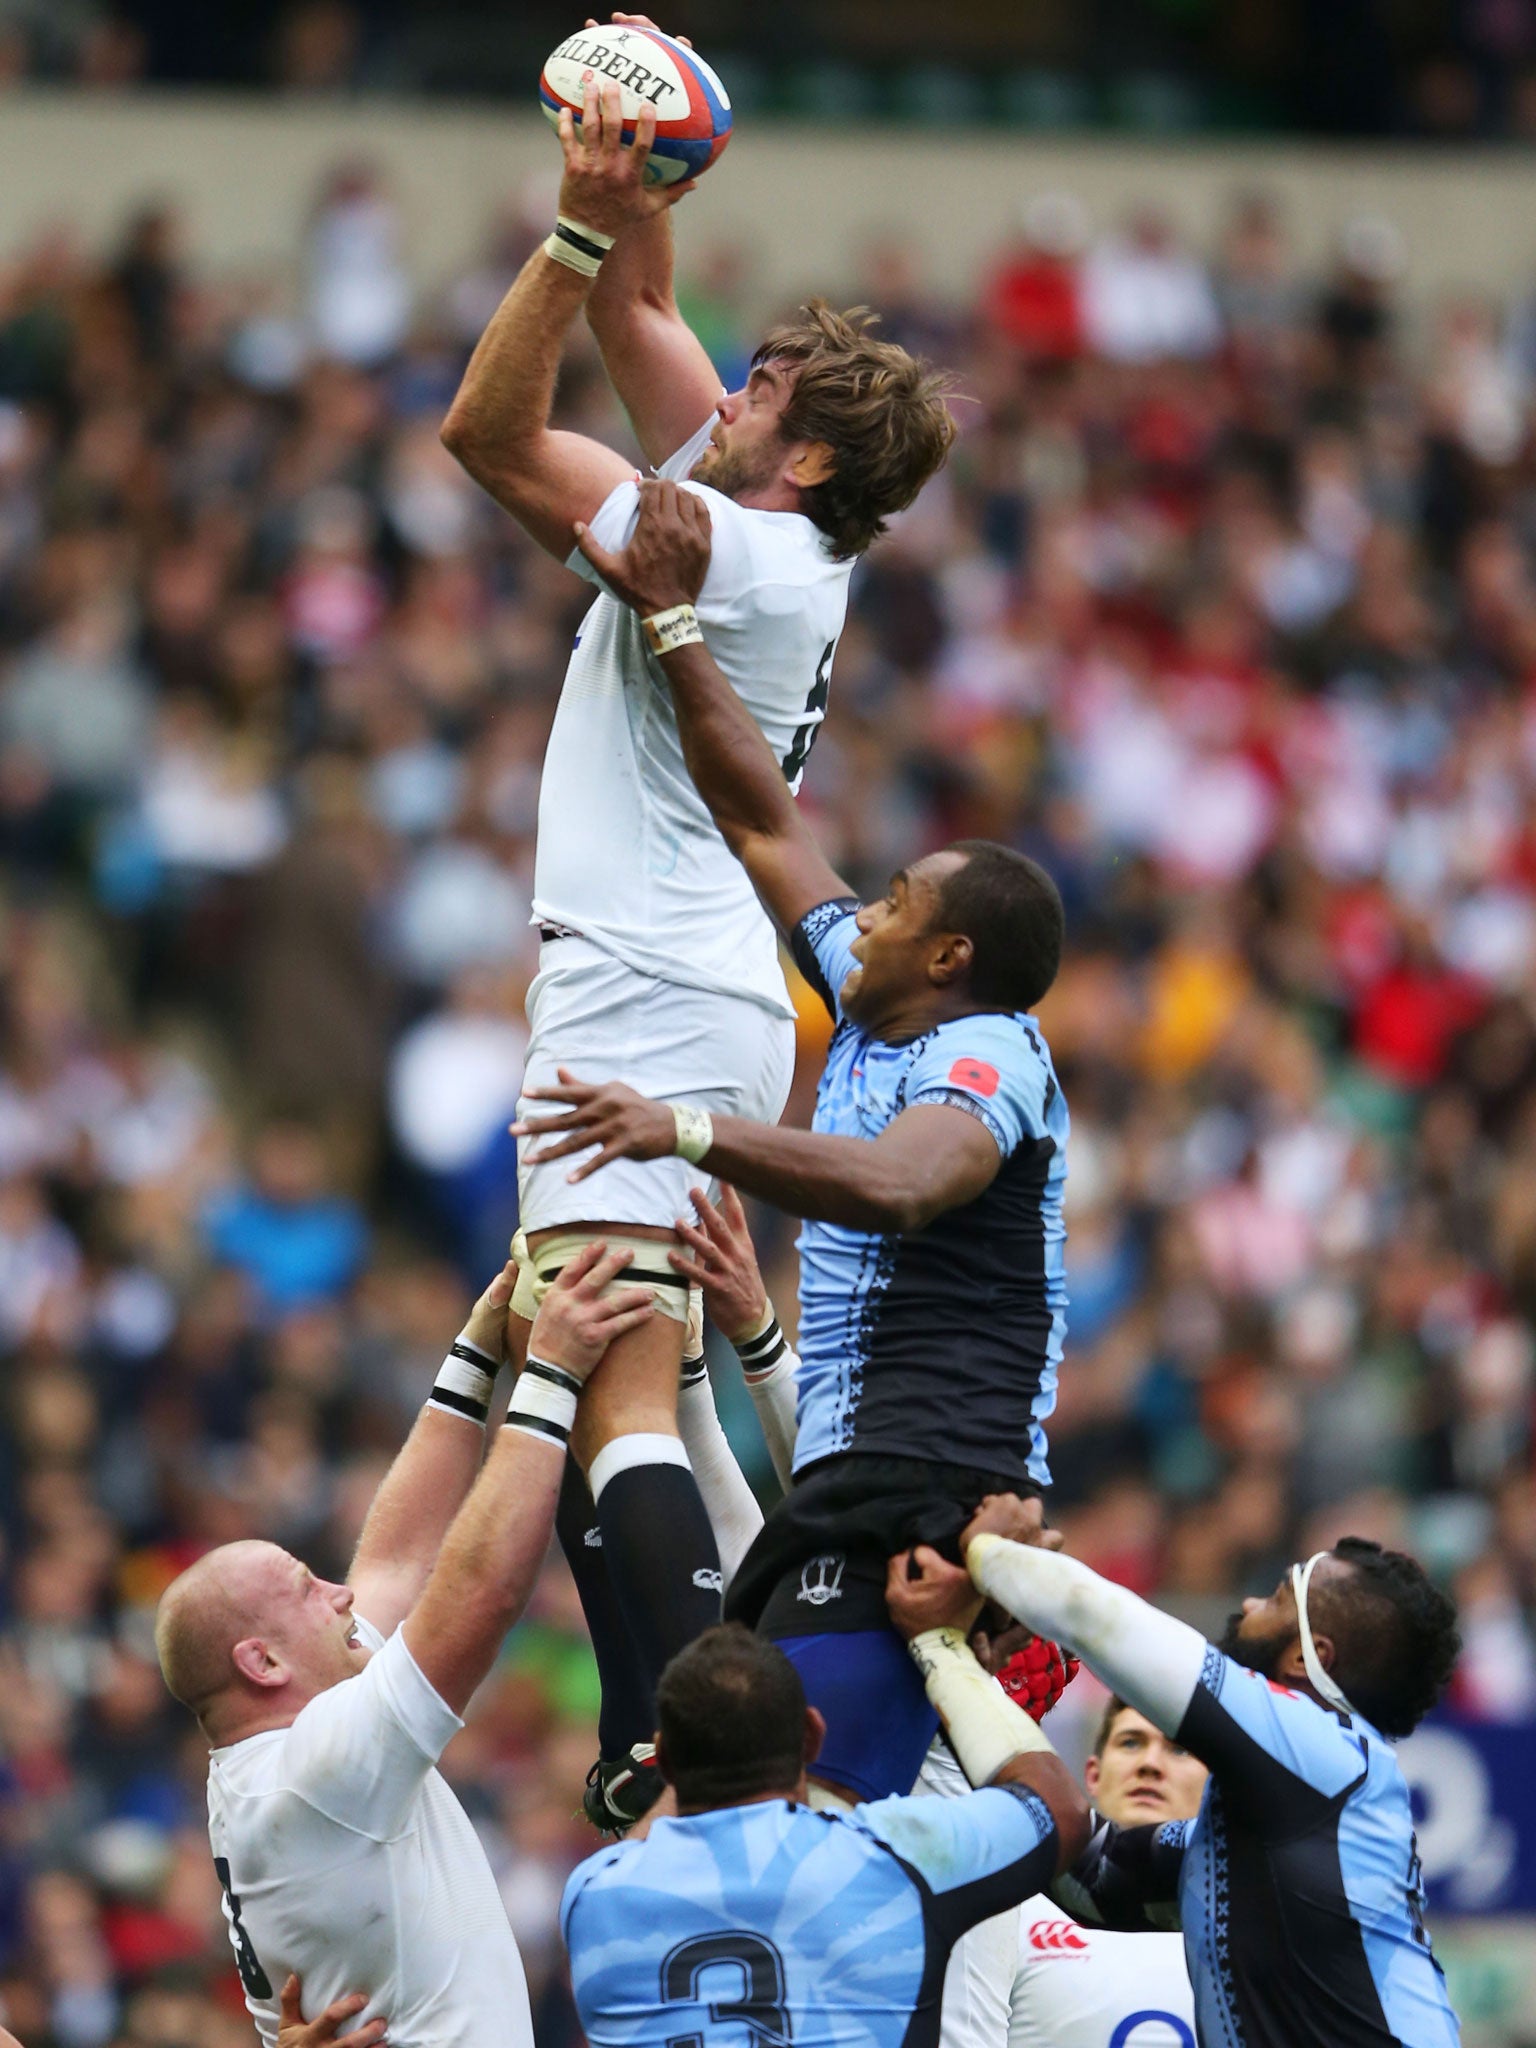 Rising star: Geoff Parling had to wait until he was 29 for his full England debut